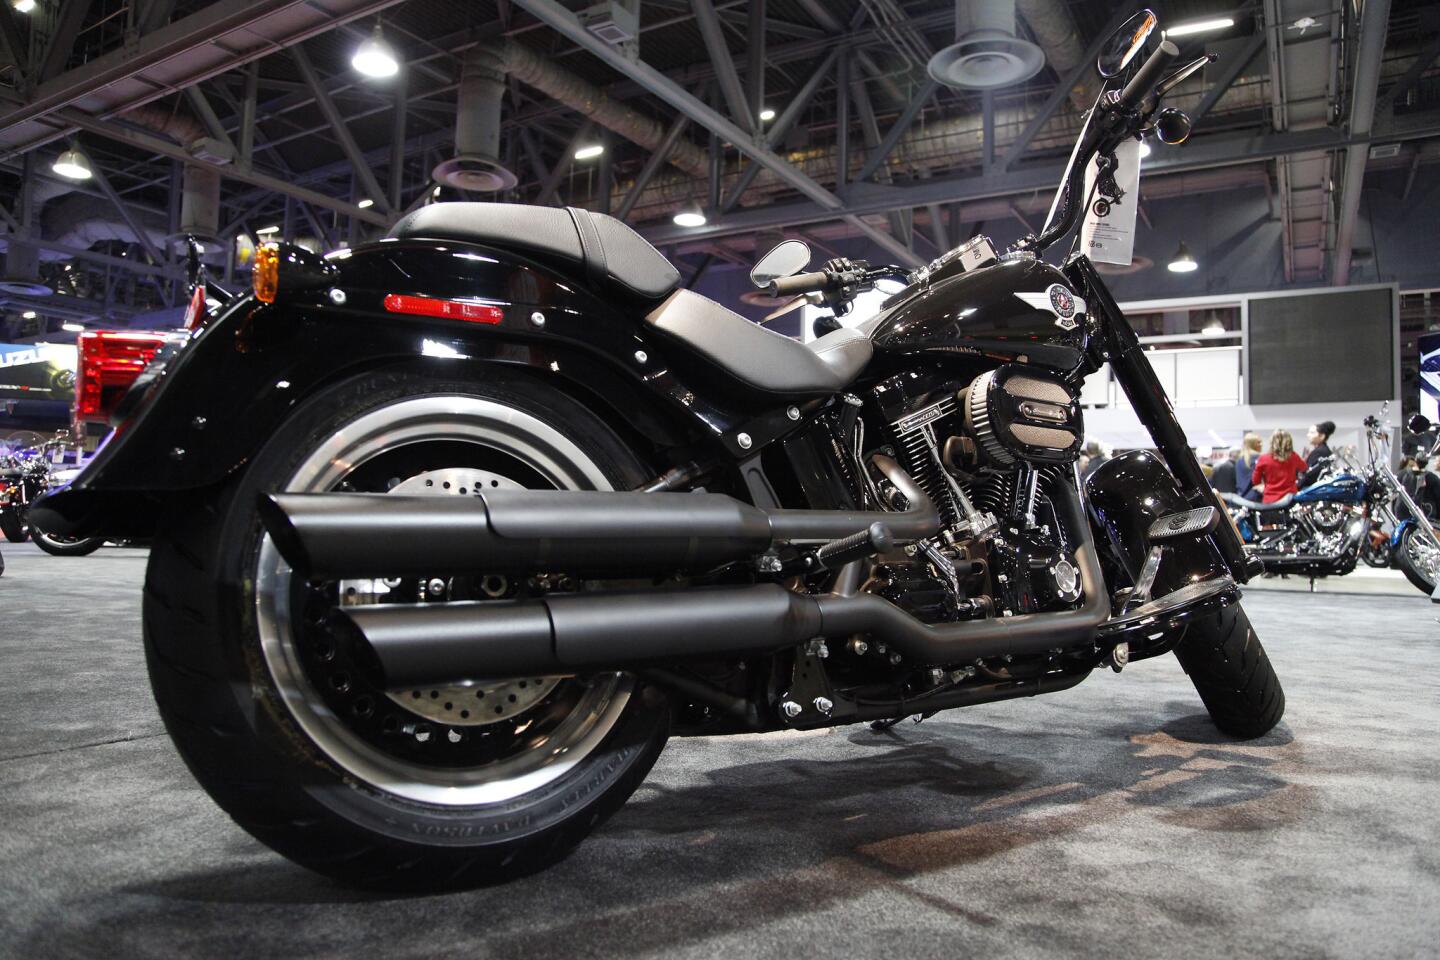 The Harley-Davidson FLSTFBS Fat Boy S is a new S-series motorcycle revealed during the Progressive International Motorcycle Show at the Long Beach Convention Center.